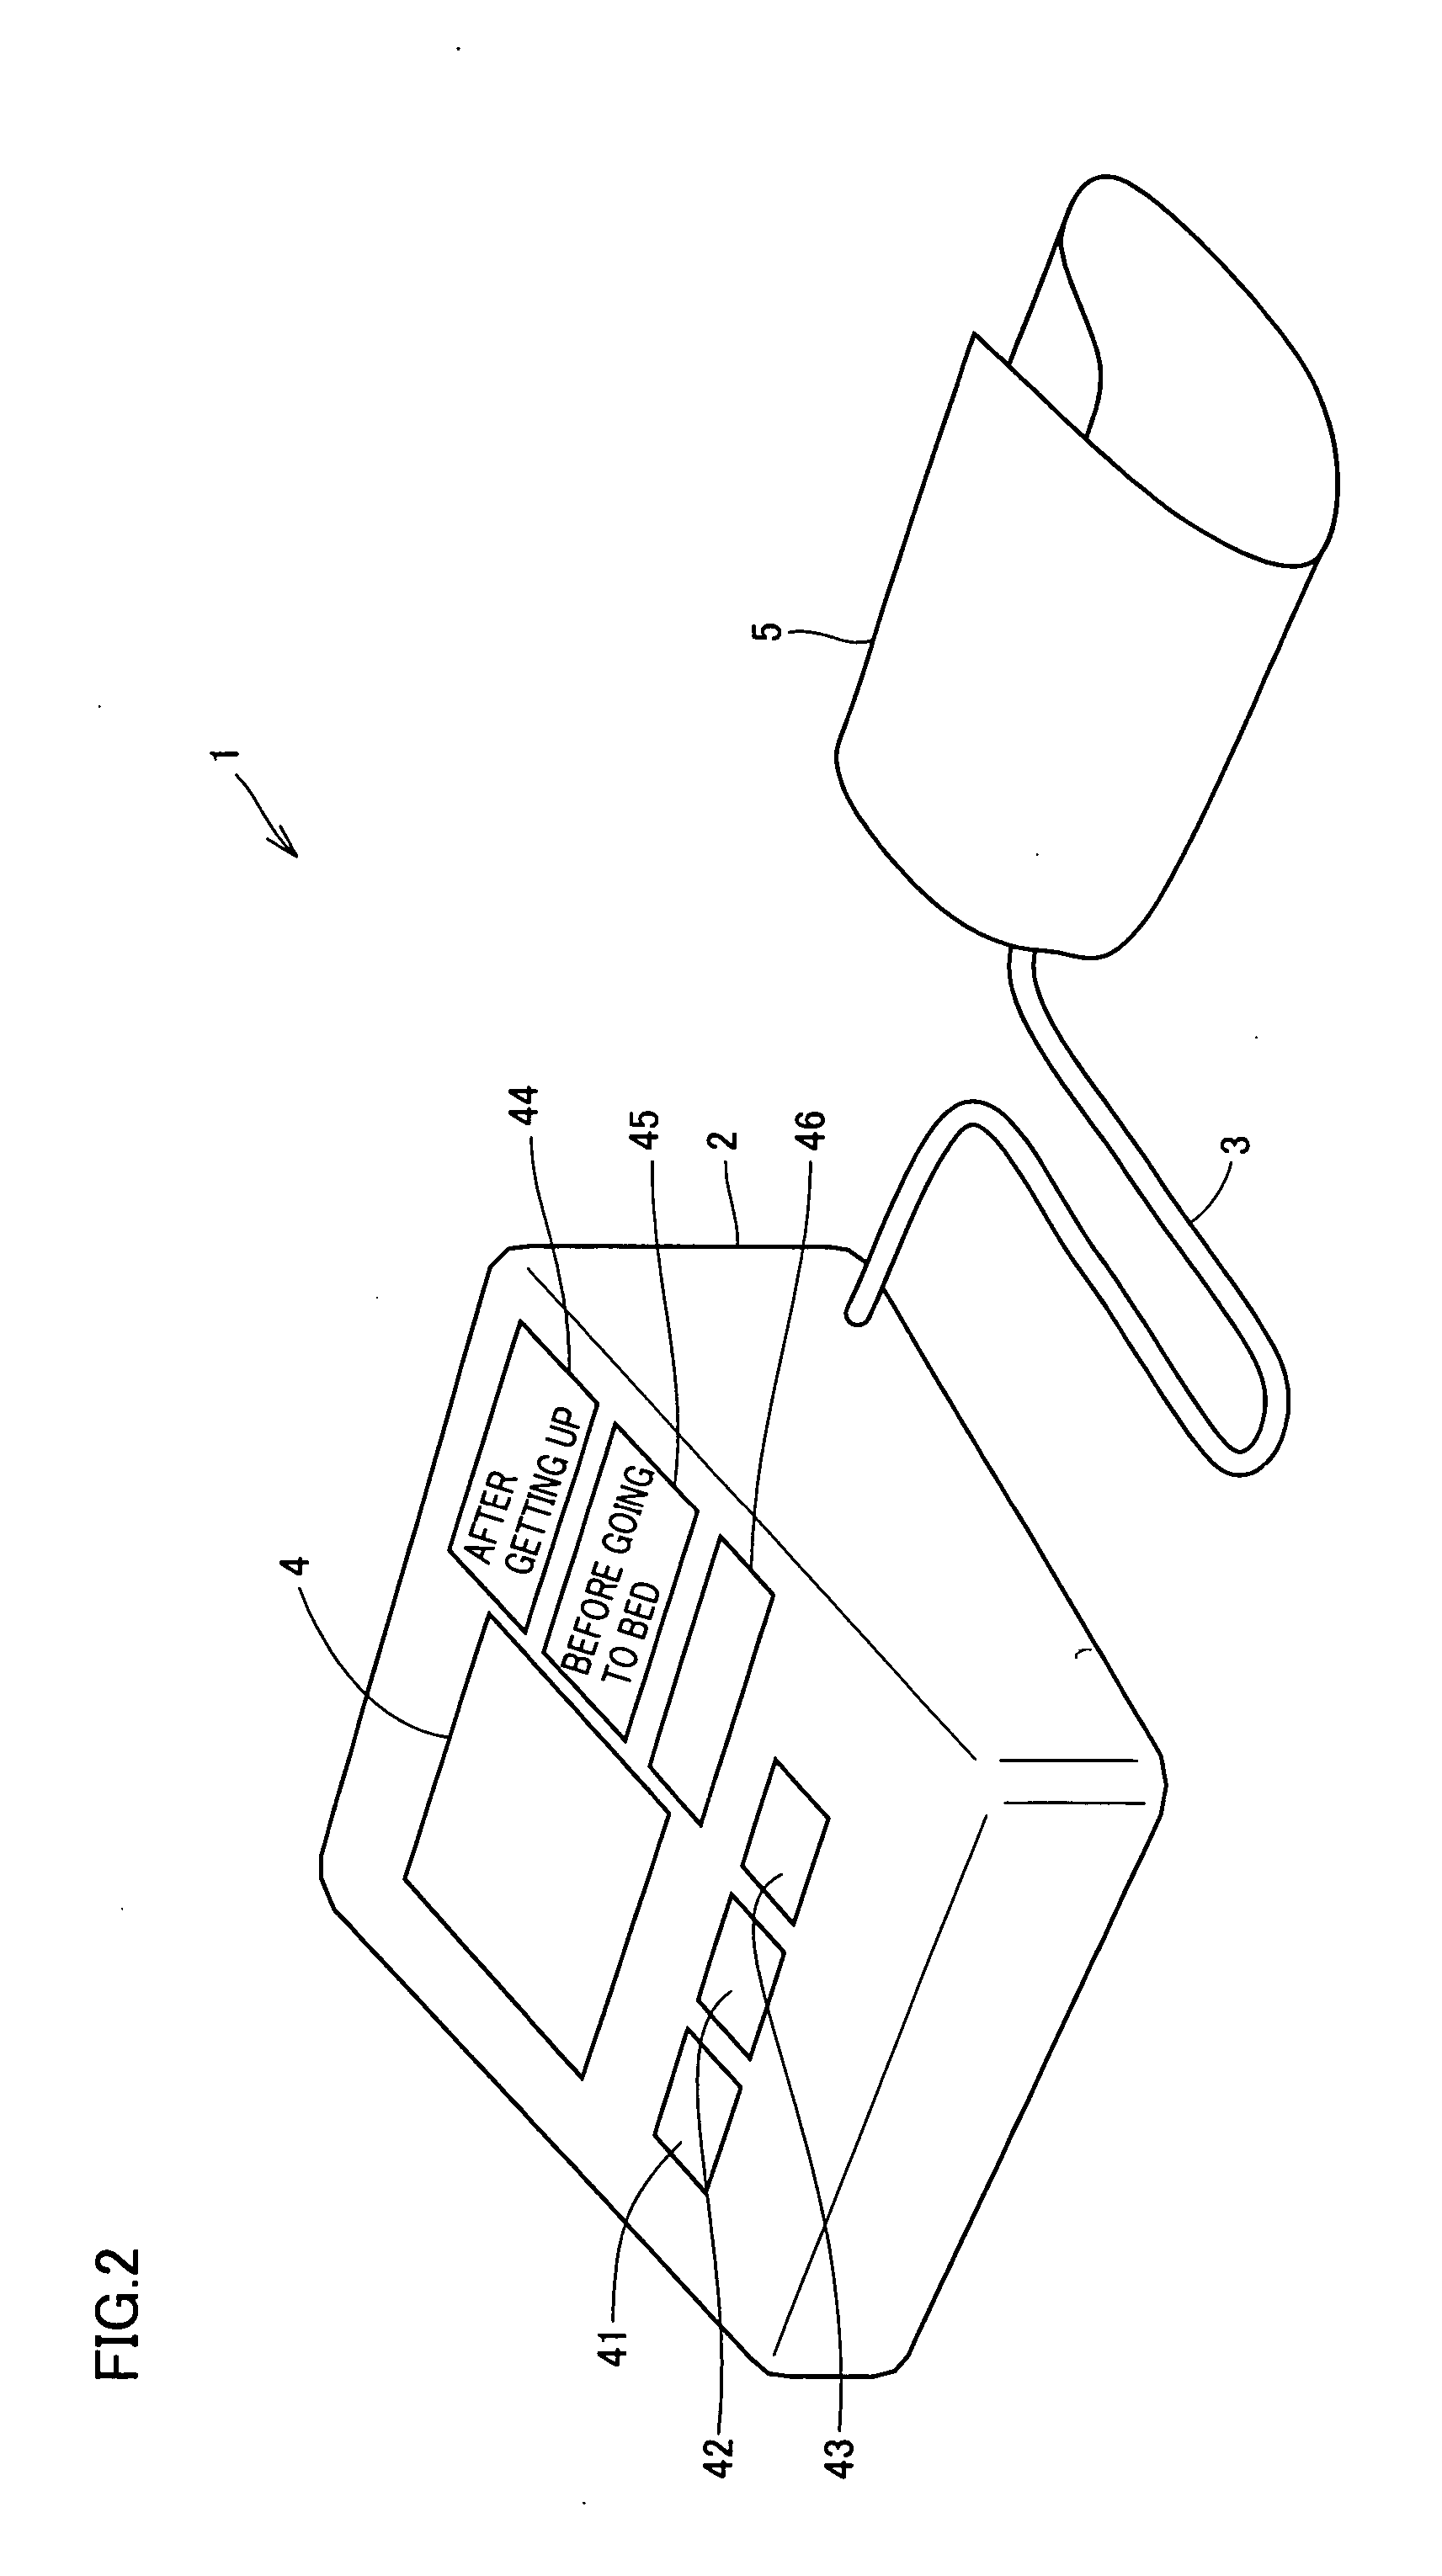 Electronic blood pressure monitor, and blood pressure measurement data processing apparatus and method